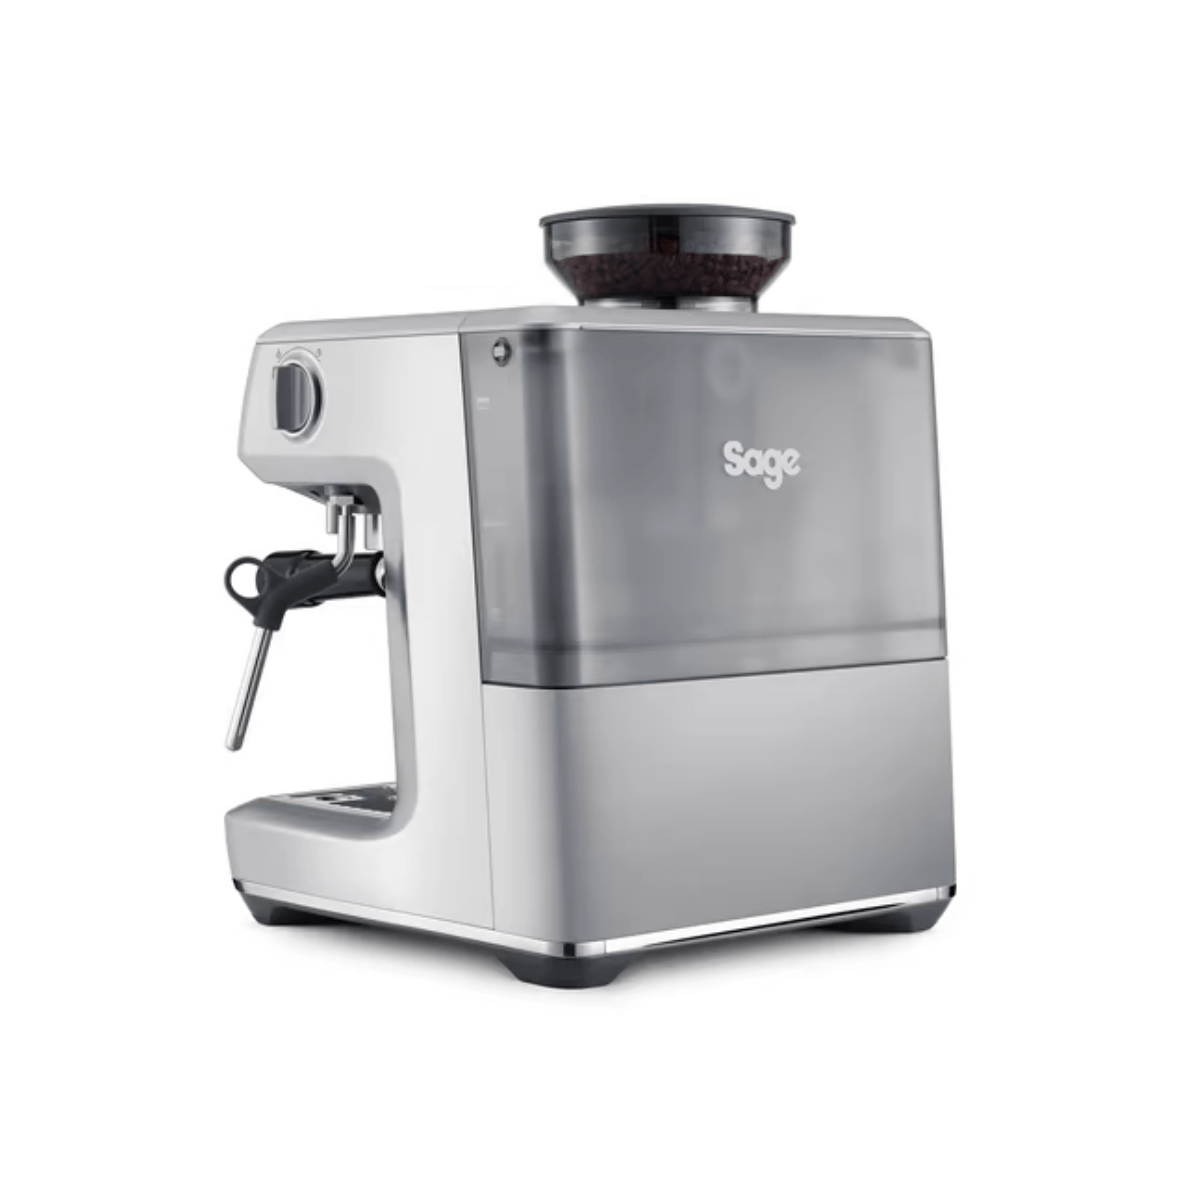 Sage The Barista Express Impress, Brushed Stainless Steel